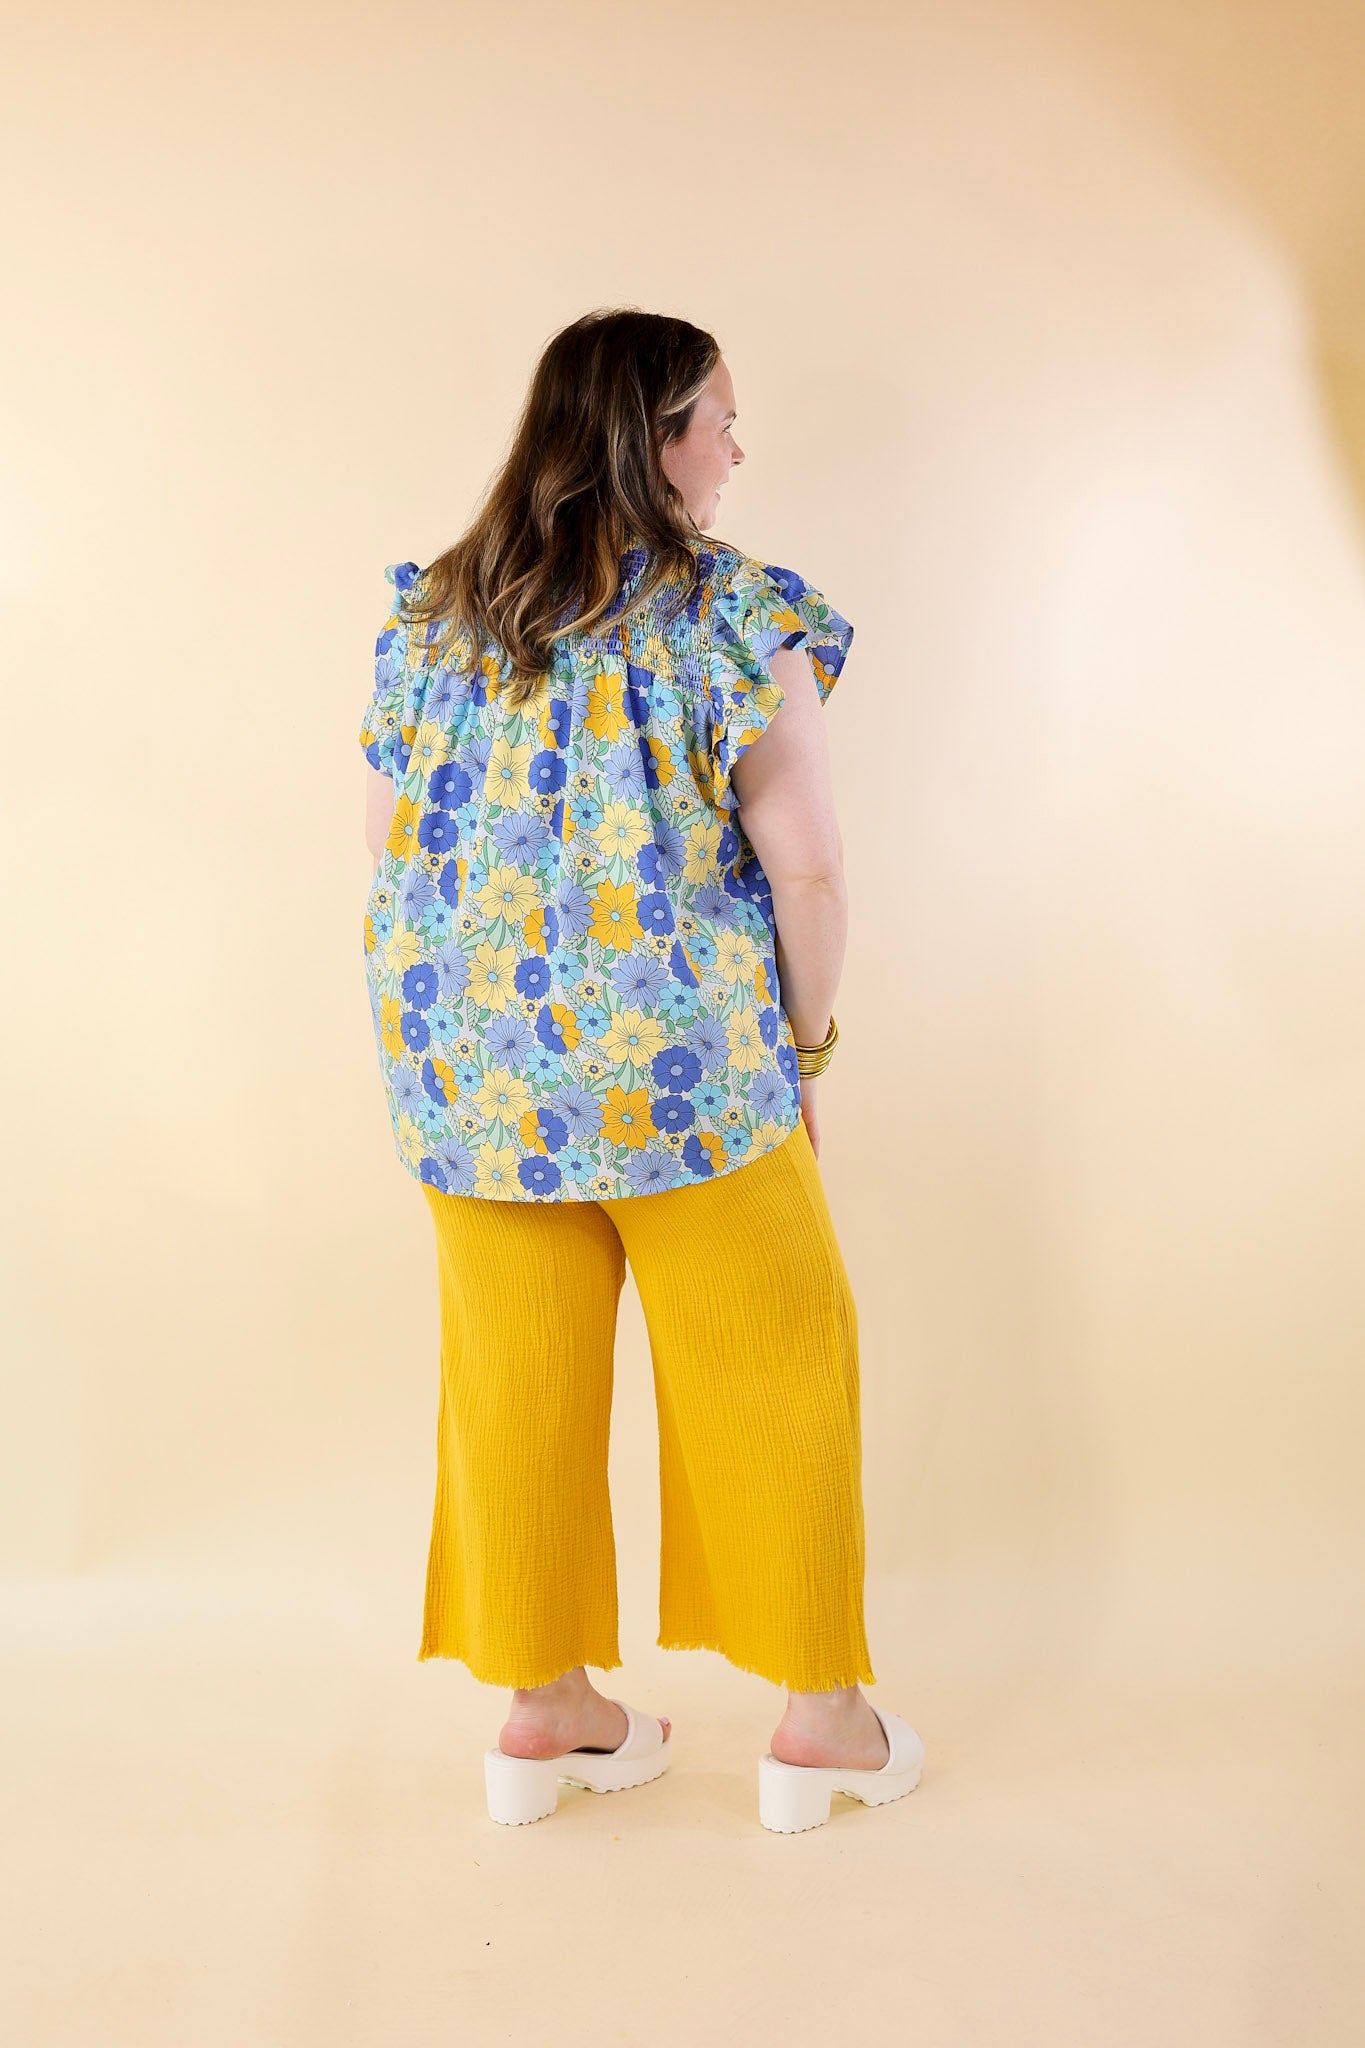 Right On Cue Elastic Waistband Cropped Pants with Frayed Hem in Yellow - Giddy Up Glamour Boutique